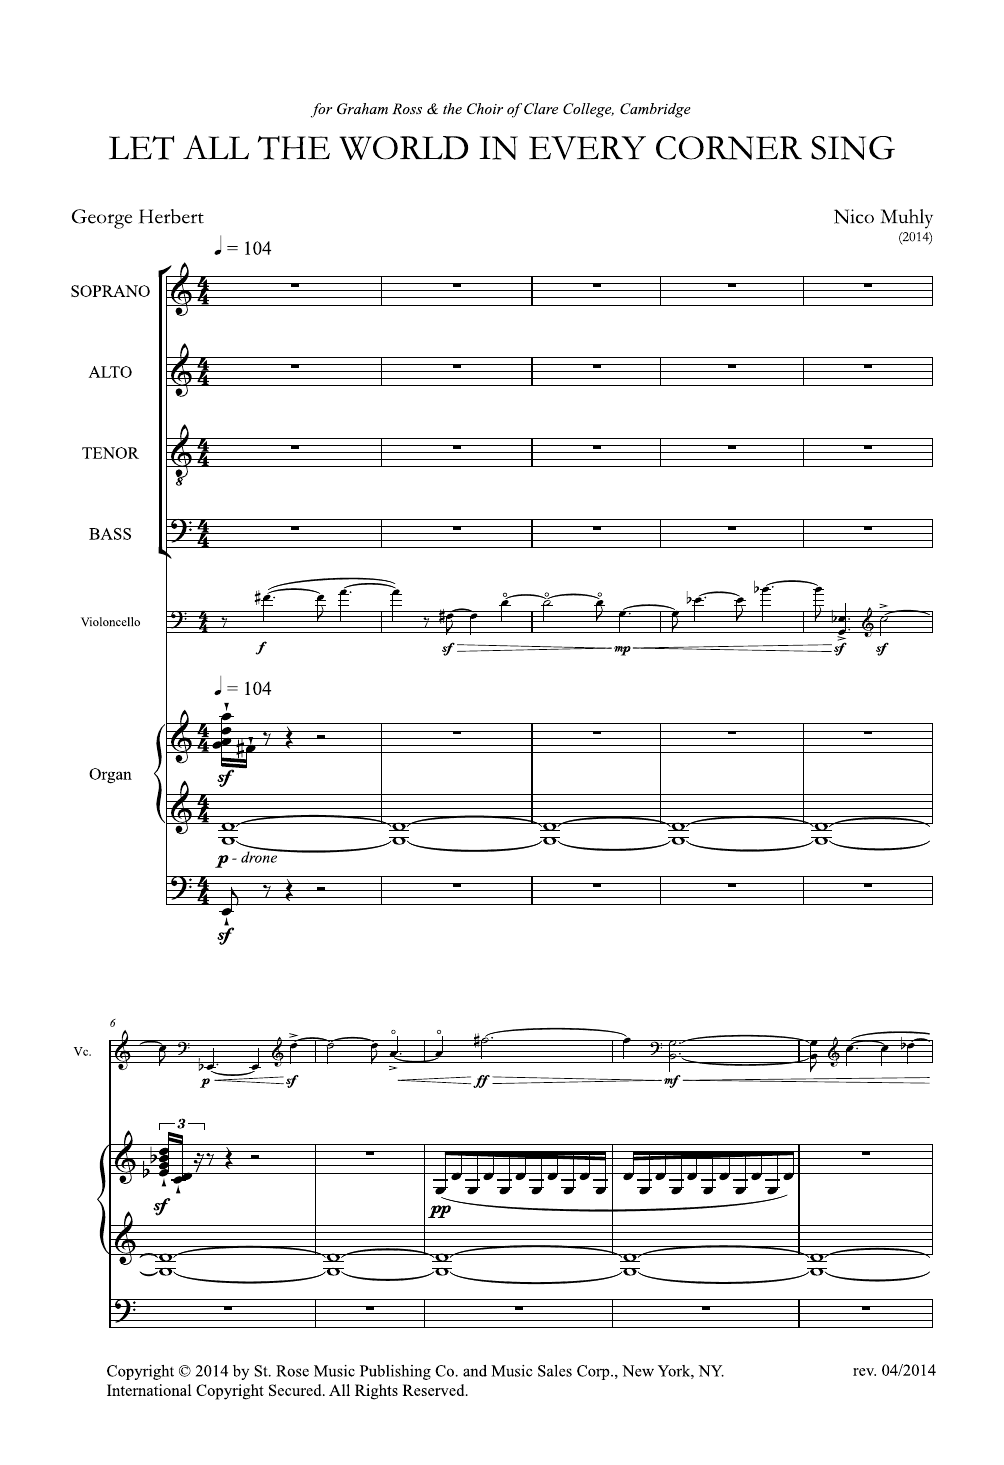 Download Nico Muhly Let All The World In Every Corner Sing Sheet Music